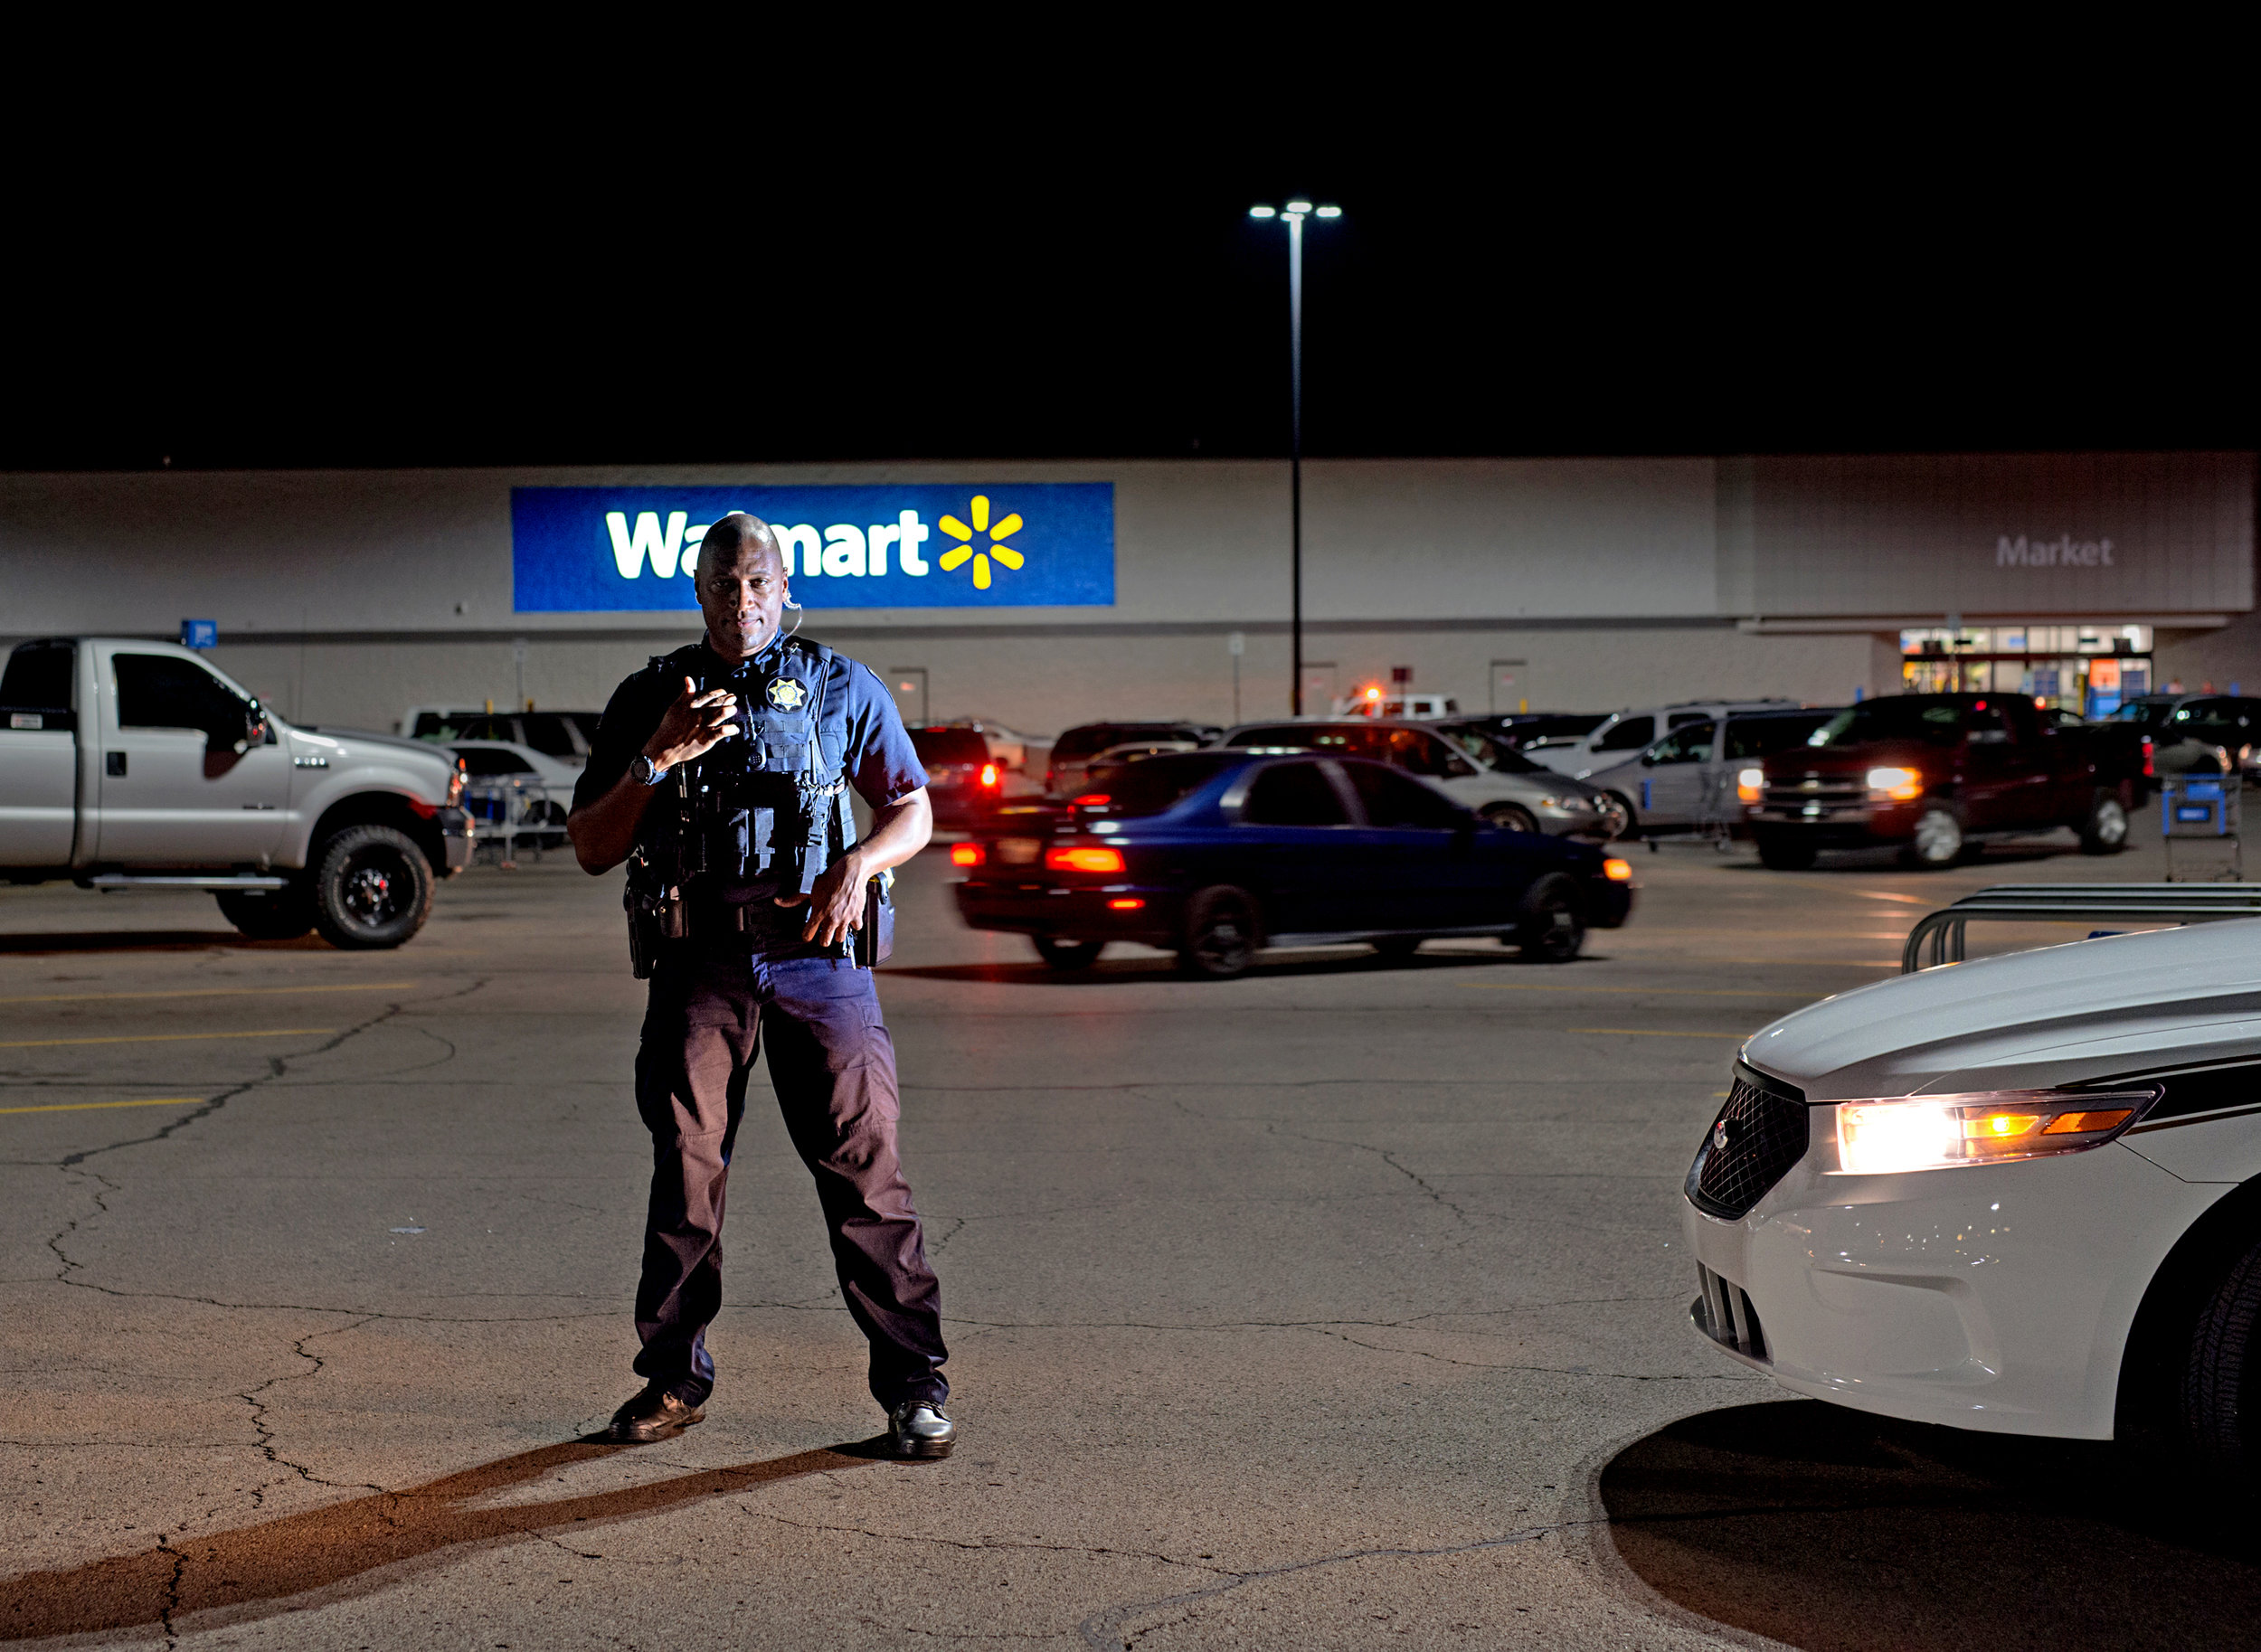  Crime at Walmart for  Bloomberg  